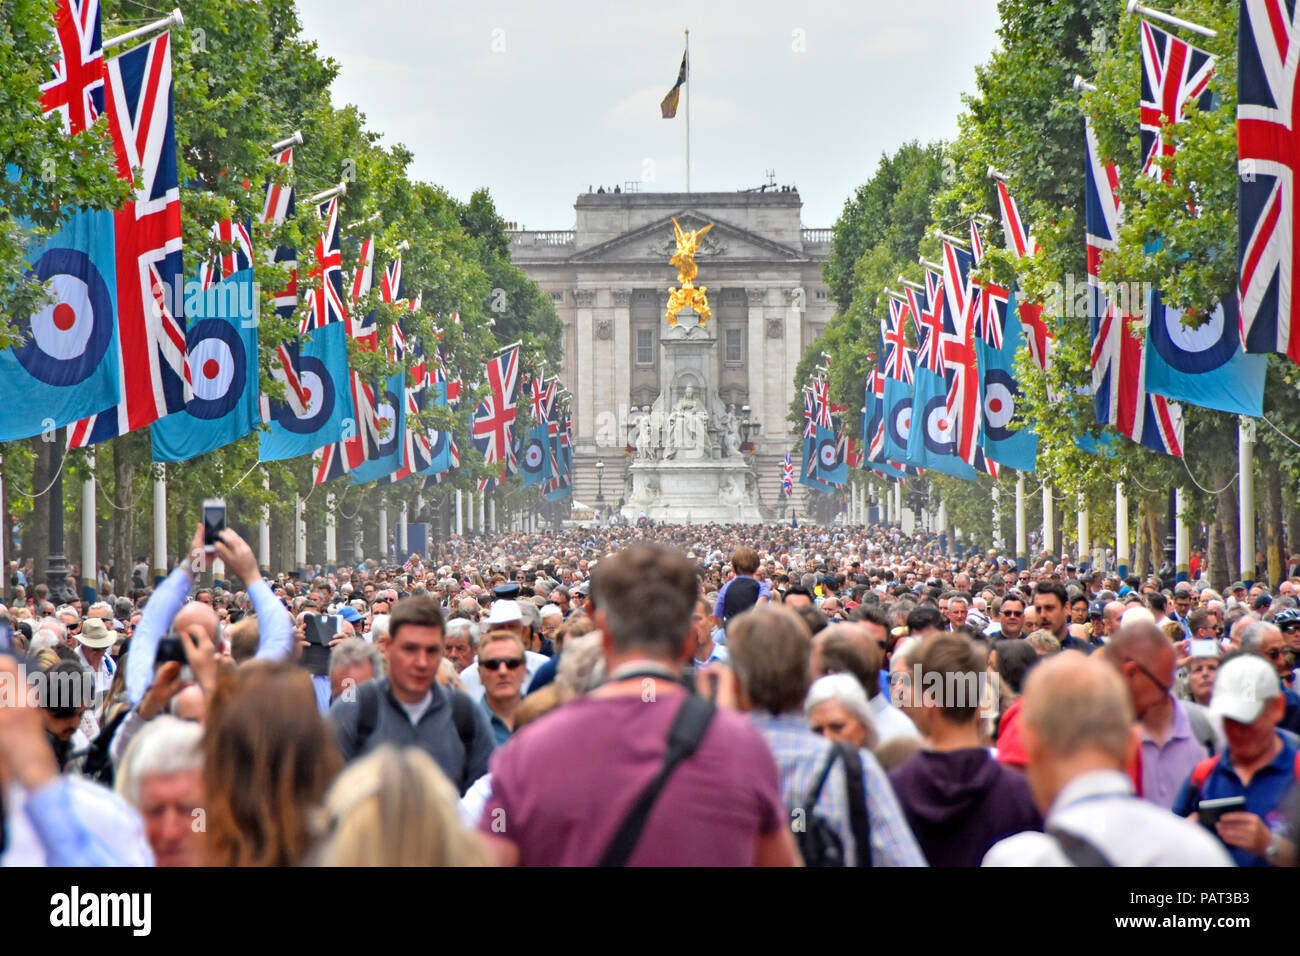 Crowds of people in The Mall London at Royal Air force RAF centenary street scene parade & flypast event Union Jack flags Buckingham Palace England UK Stock Photo